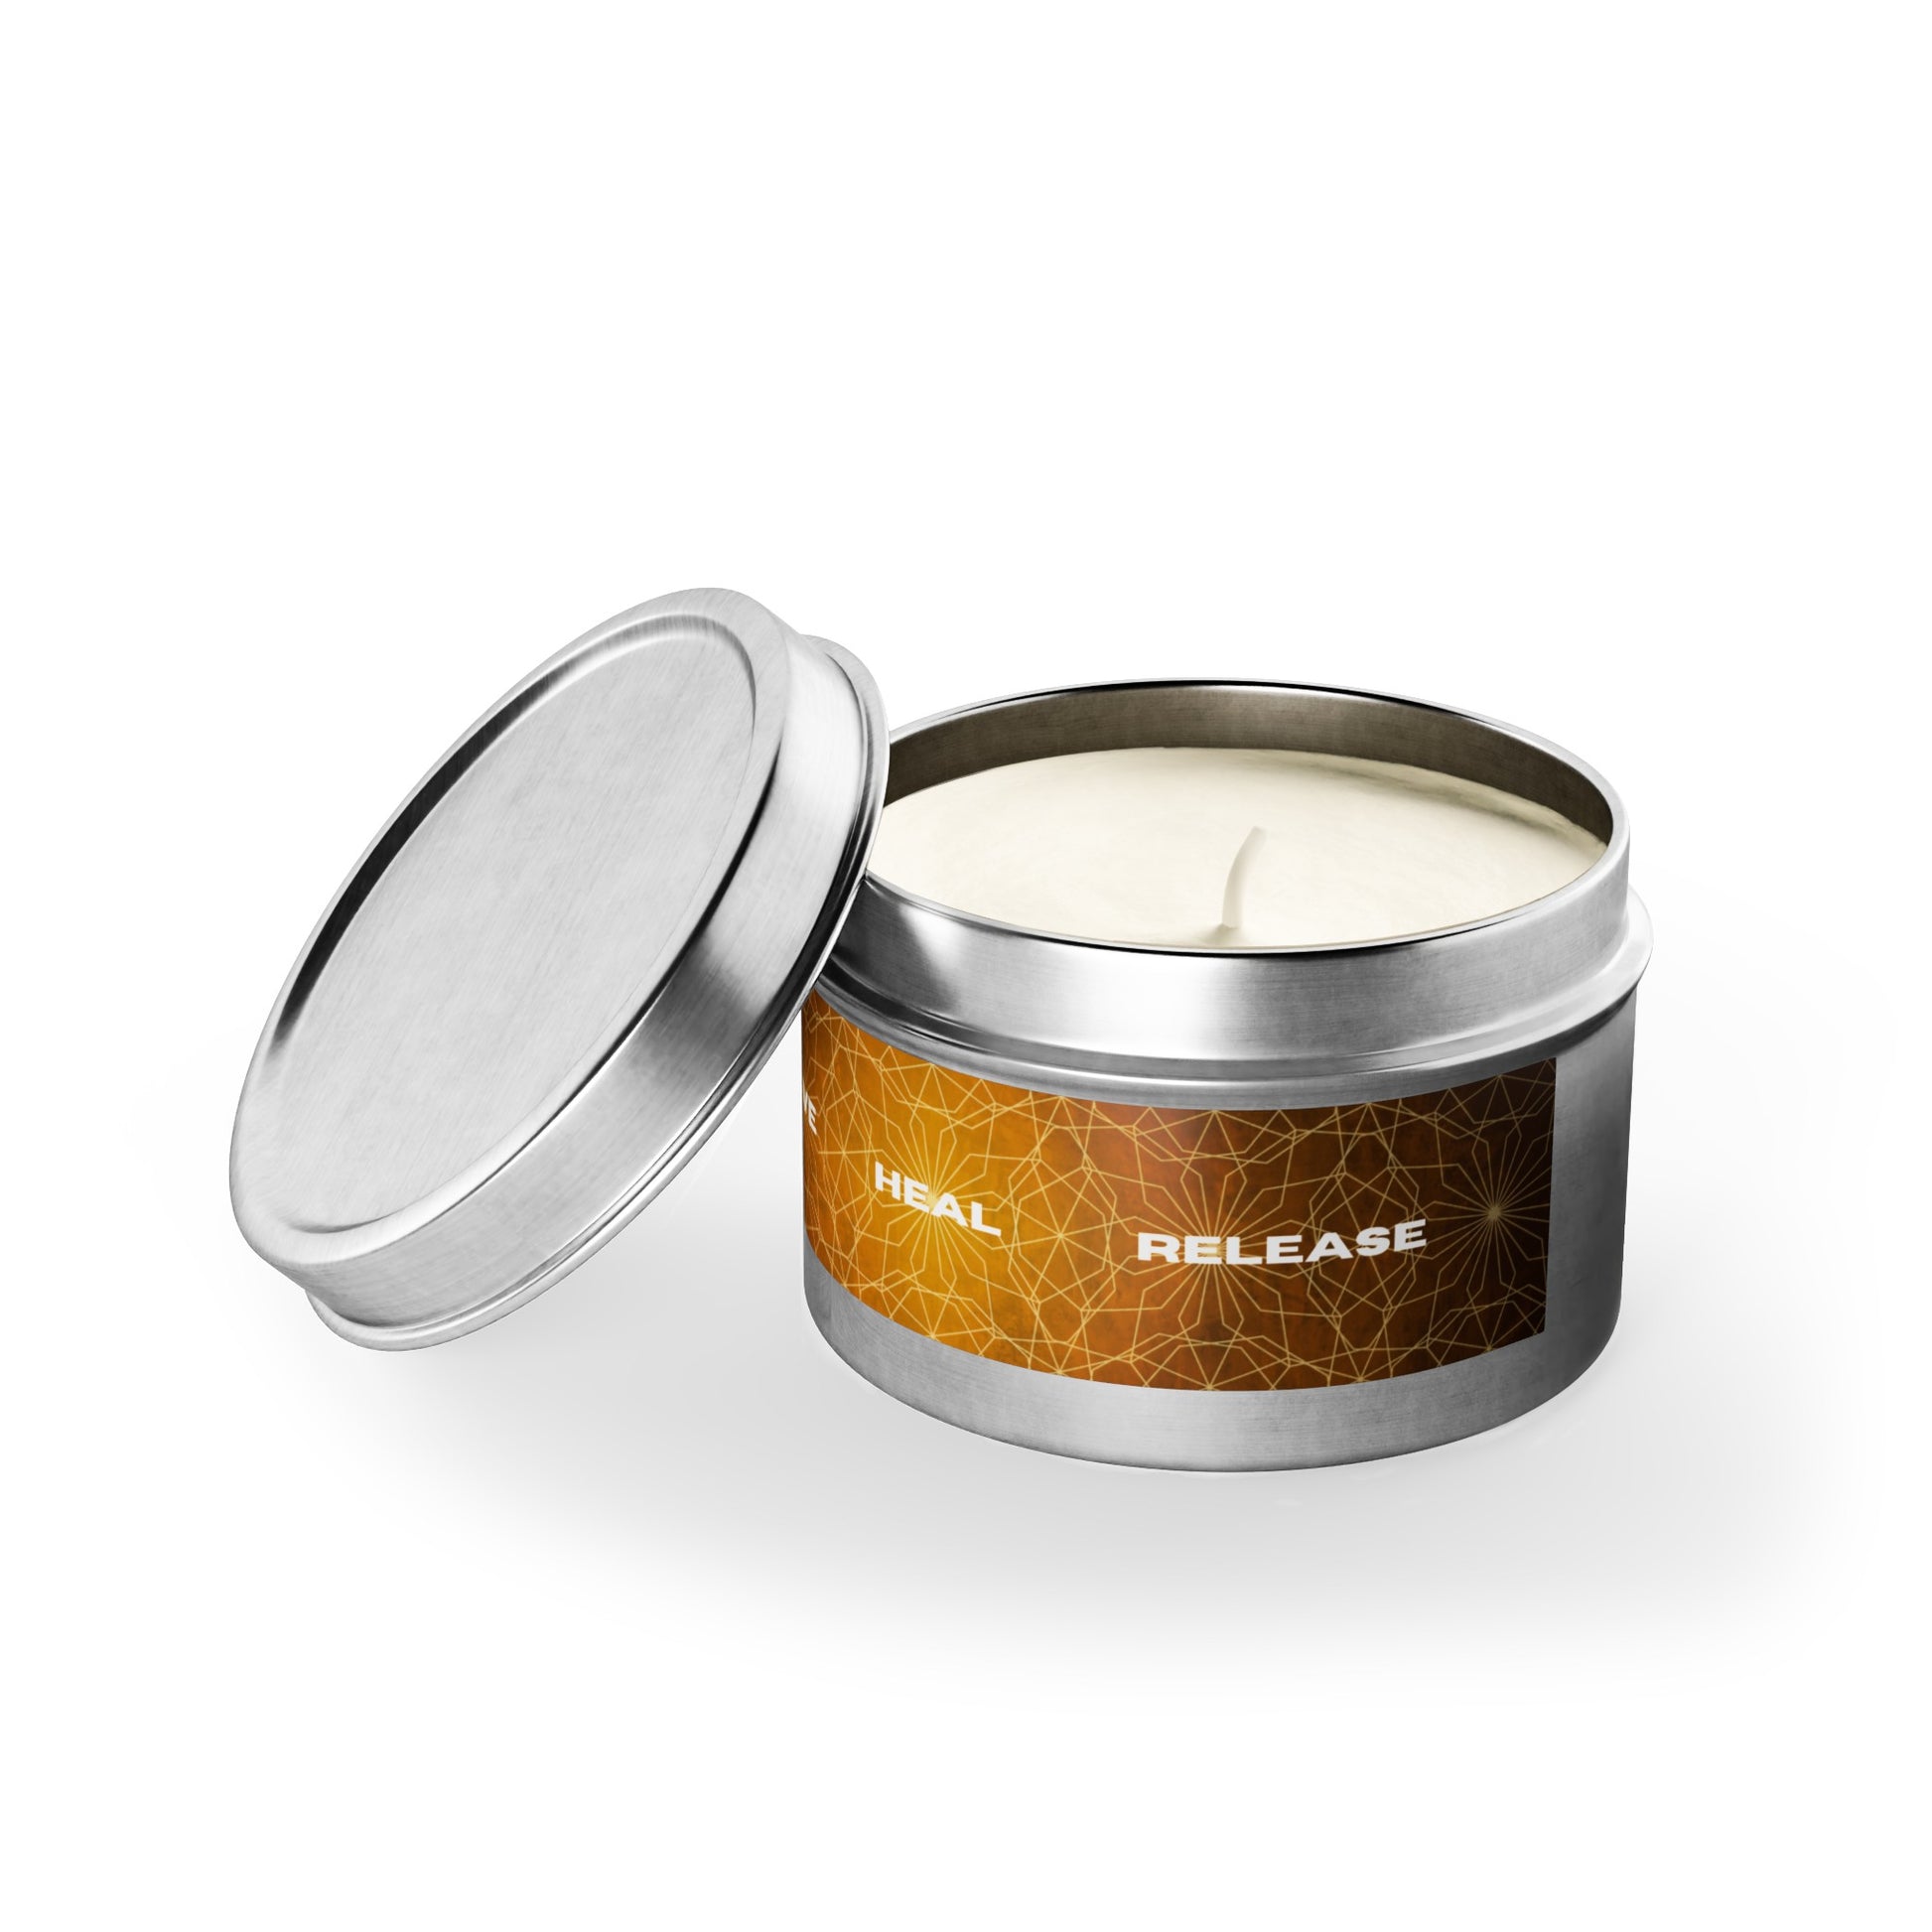 OBSERVE. HEAL. RELEASE. Tin Candle made of coconut and soy wax designed by SmithRidge.farm.